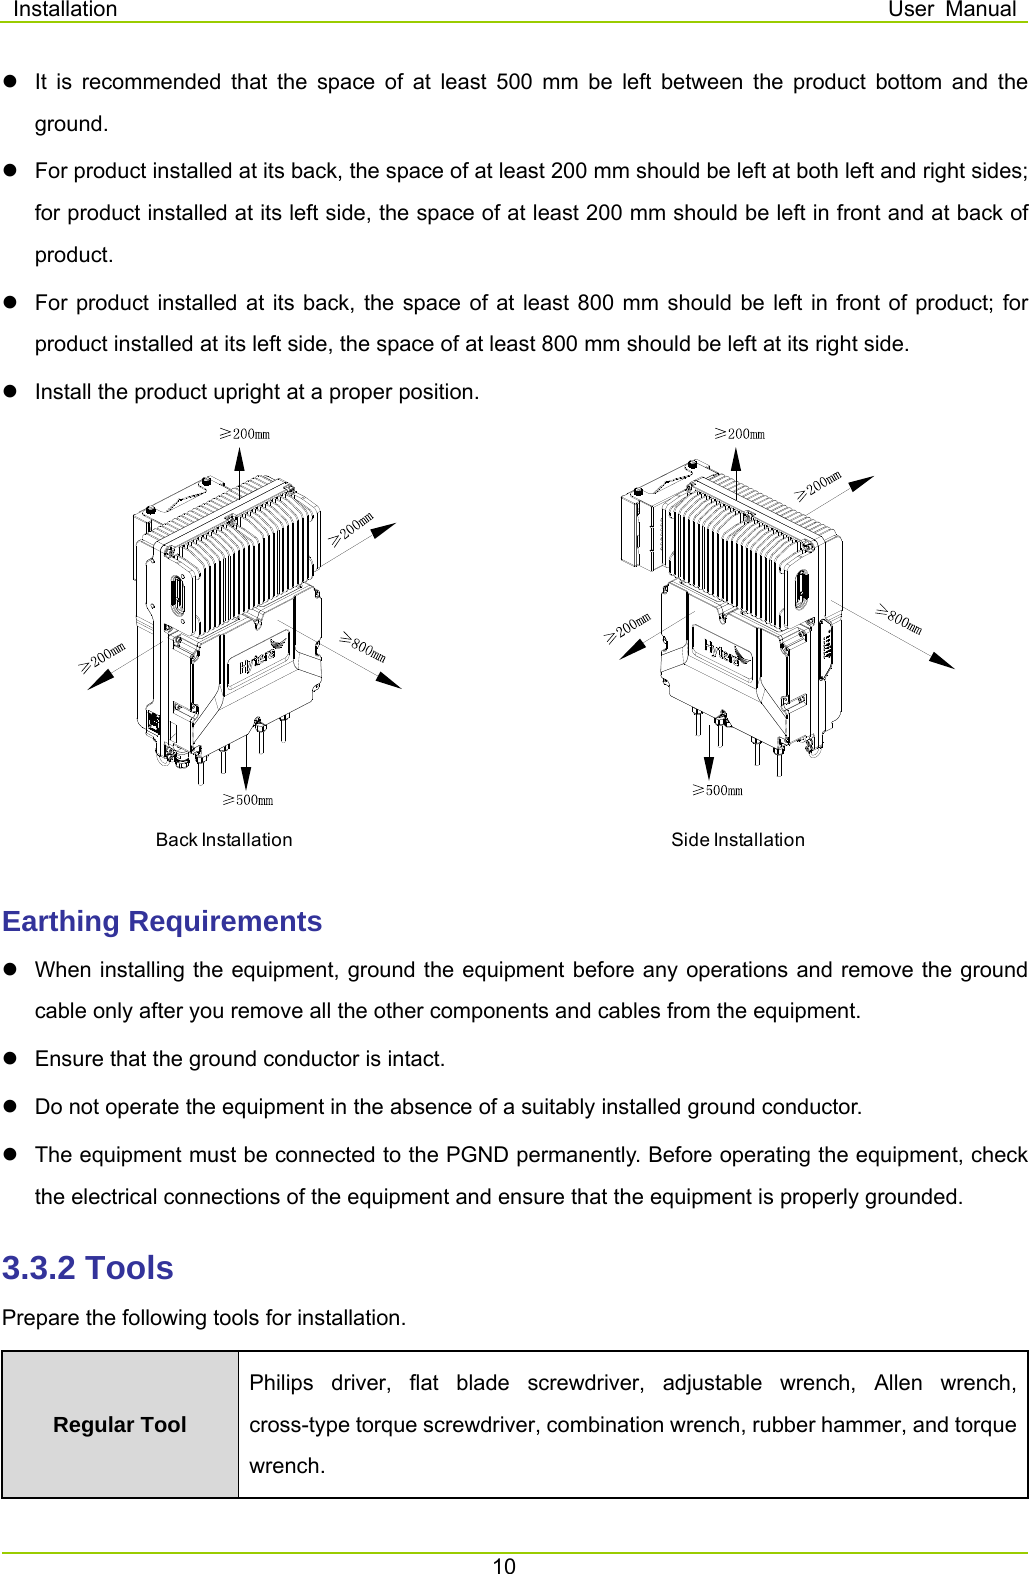 Installation  User Manual 10    It is recommended that the space of at least 500 mm be left between the product bottom and the ground.    For product installed at its back, the space of at least 200 mm should be left at both left and right sides; for product installed at its left side, the space of at least 200 mm should be left in front and at back of product.    For product installed at its back, the space of at least 800 mm should be left in front of product; for product installed at its left side, the space of at least 800 mm should be left at its right side.     Install the product upright at a proper position.  Earthing Requirements   When installing the equipment, ground the equipment before any operations and remove the ground cable only after you remove all the other components and cables from the equipment.   Ensure that the ground conductor is intact.   Do not operate the equipment in the absence of a suitably installed ground conductor.     The equipment must be connected to the PGND permanently. Before operating the equipment, check the electrical connections of the equipment and ensure that the equipment is properly grounded.     3.3.2 Tools Prepare the following tools for installation.   Regular Tool Philips driver, flat blade screwdriver, adjustable wrench, Allen wrench, cross-type torque screwdriver, combination wrench, rubber hammer, and torque wrench.  Back Installation Side Installation